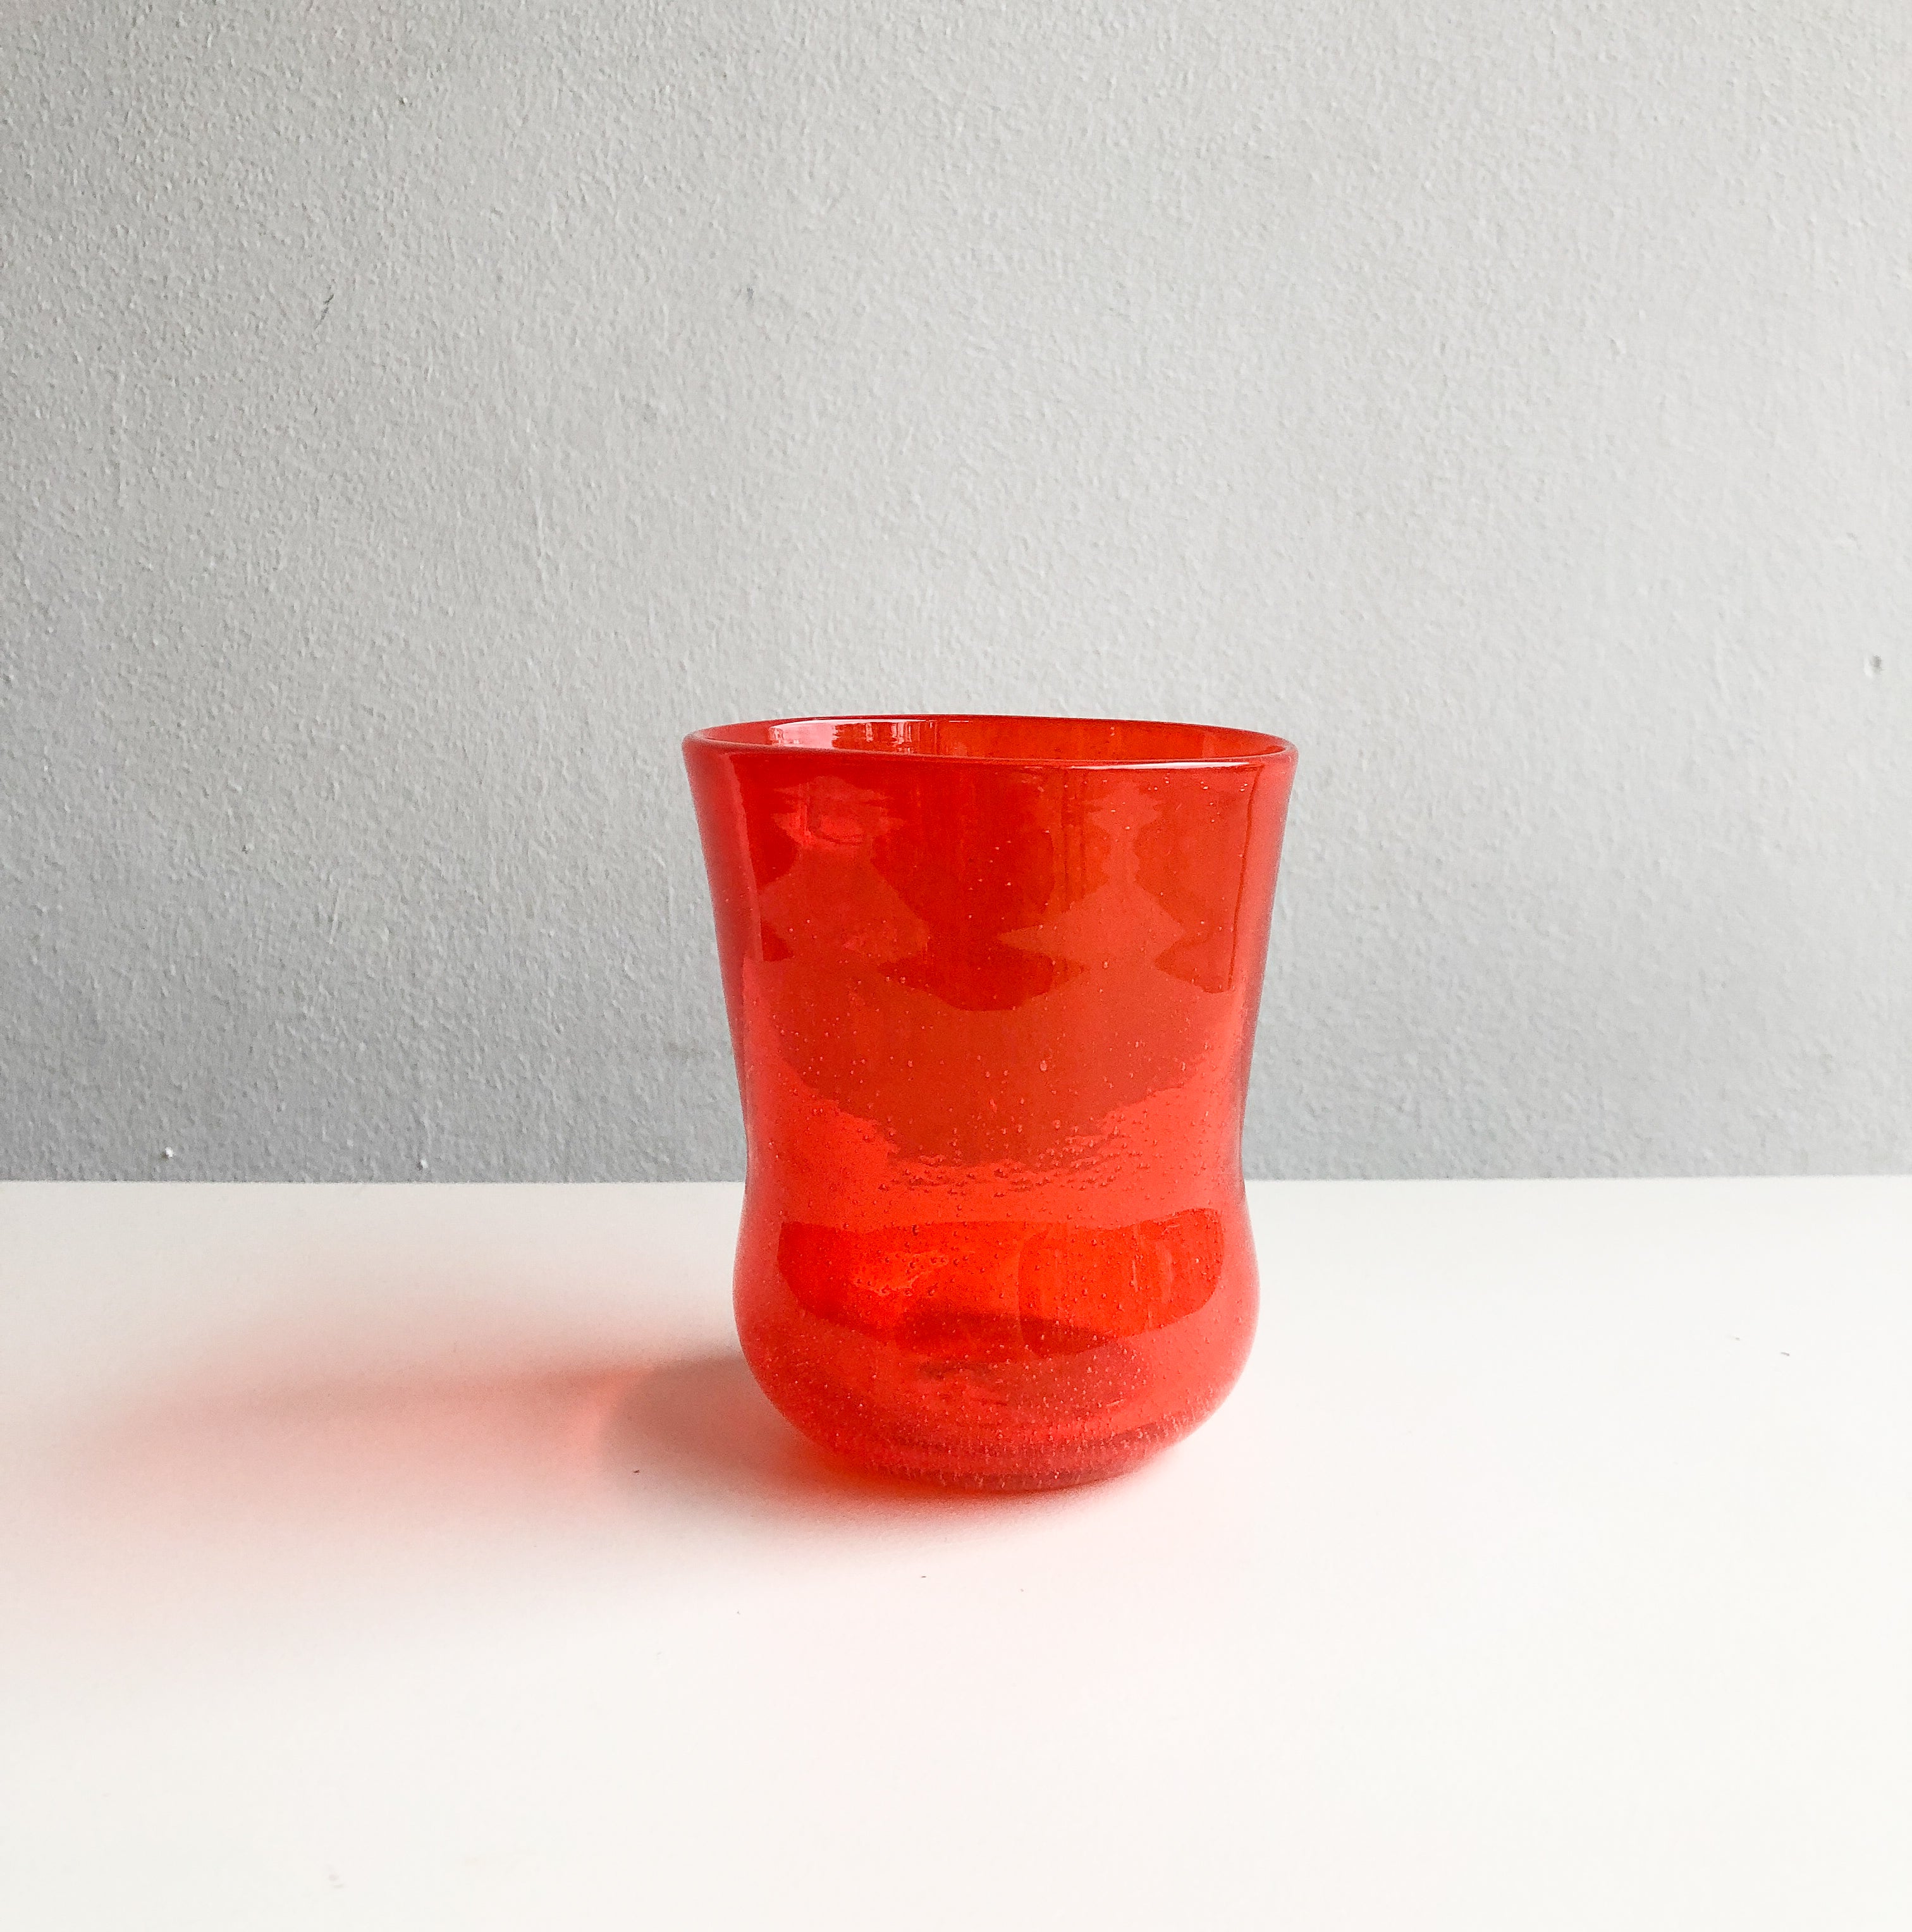 Candy Drink Glasses in Chilli by PROSE Tabletop